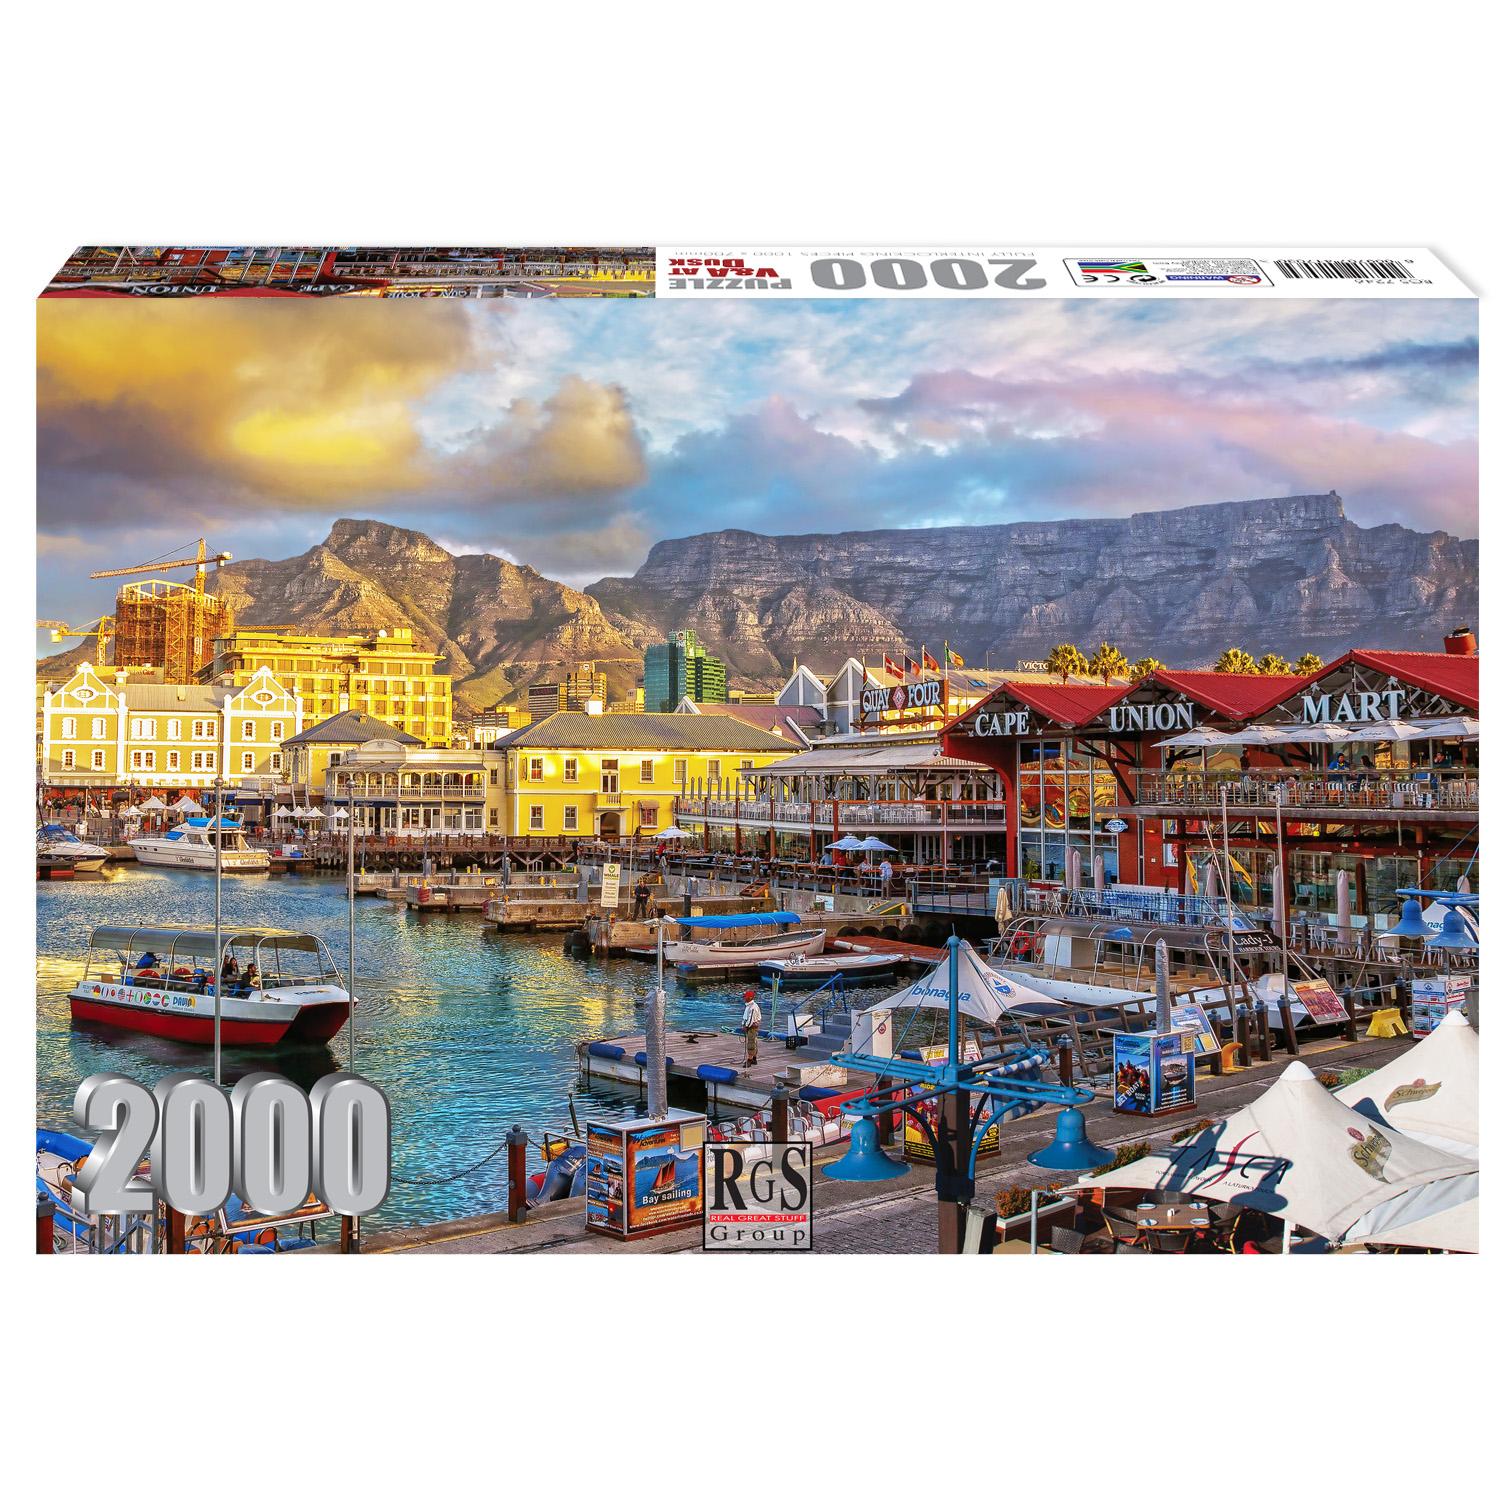 box contains 2000pc puzzle of evening vie of V&A Waterfront overlooking Table Mountain